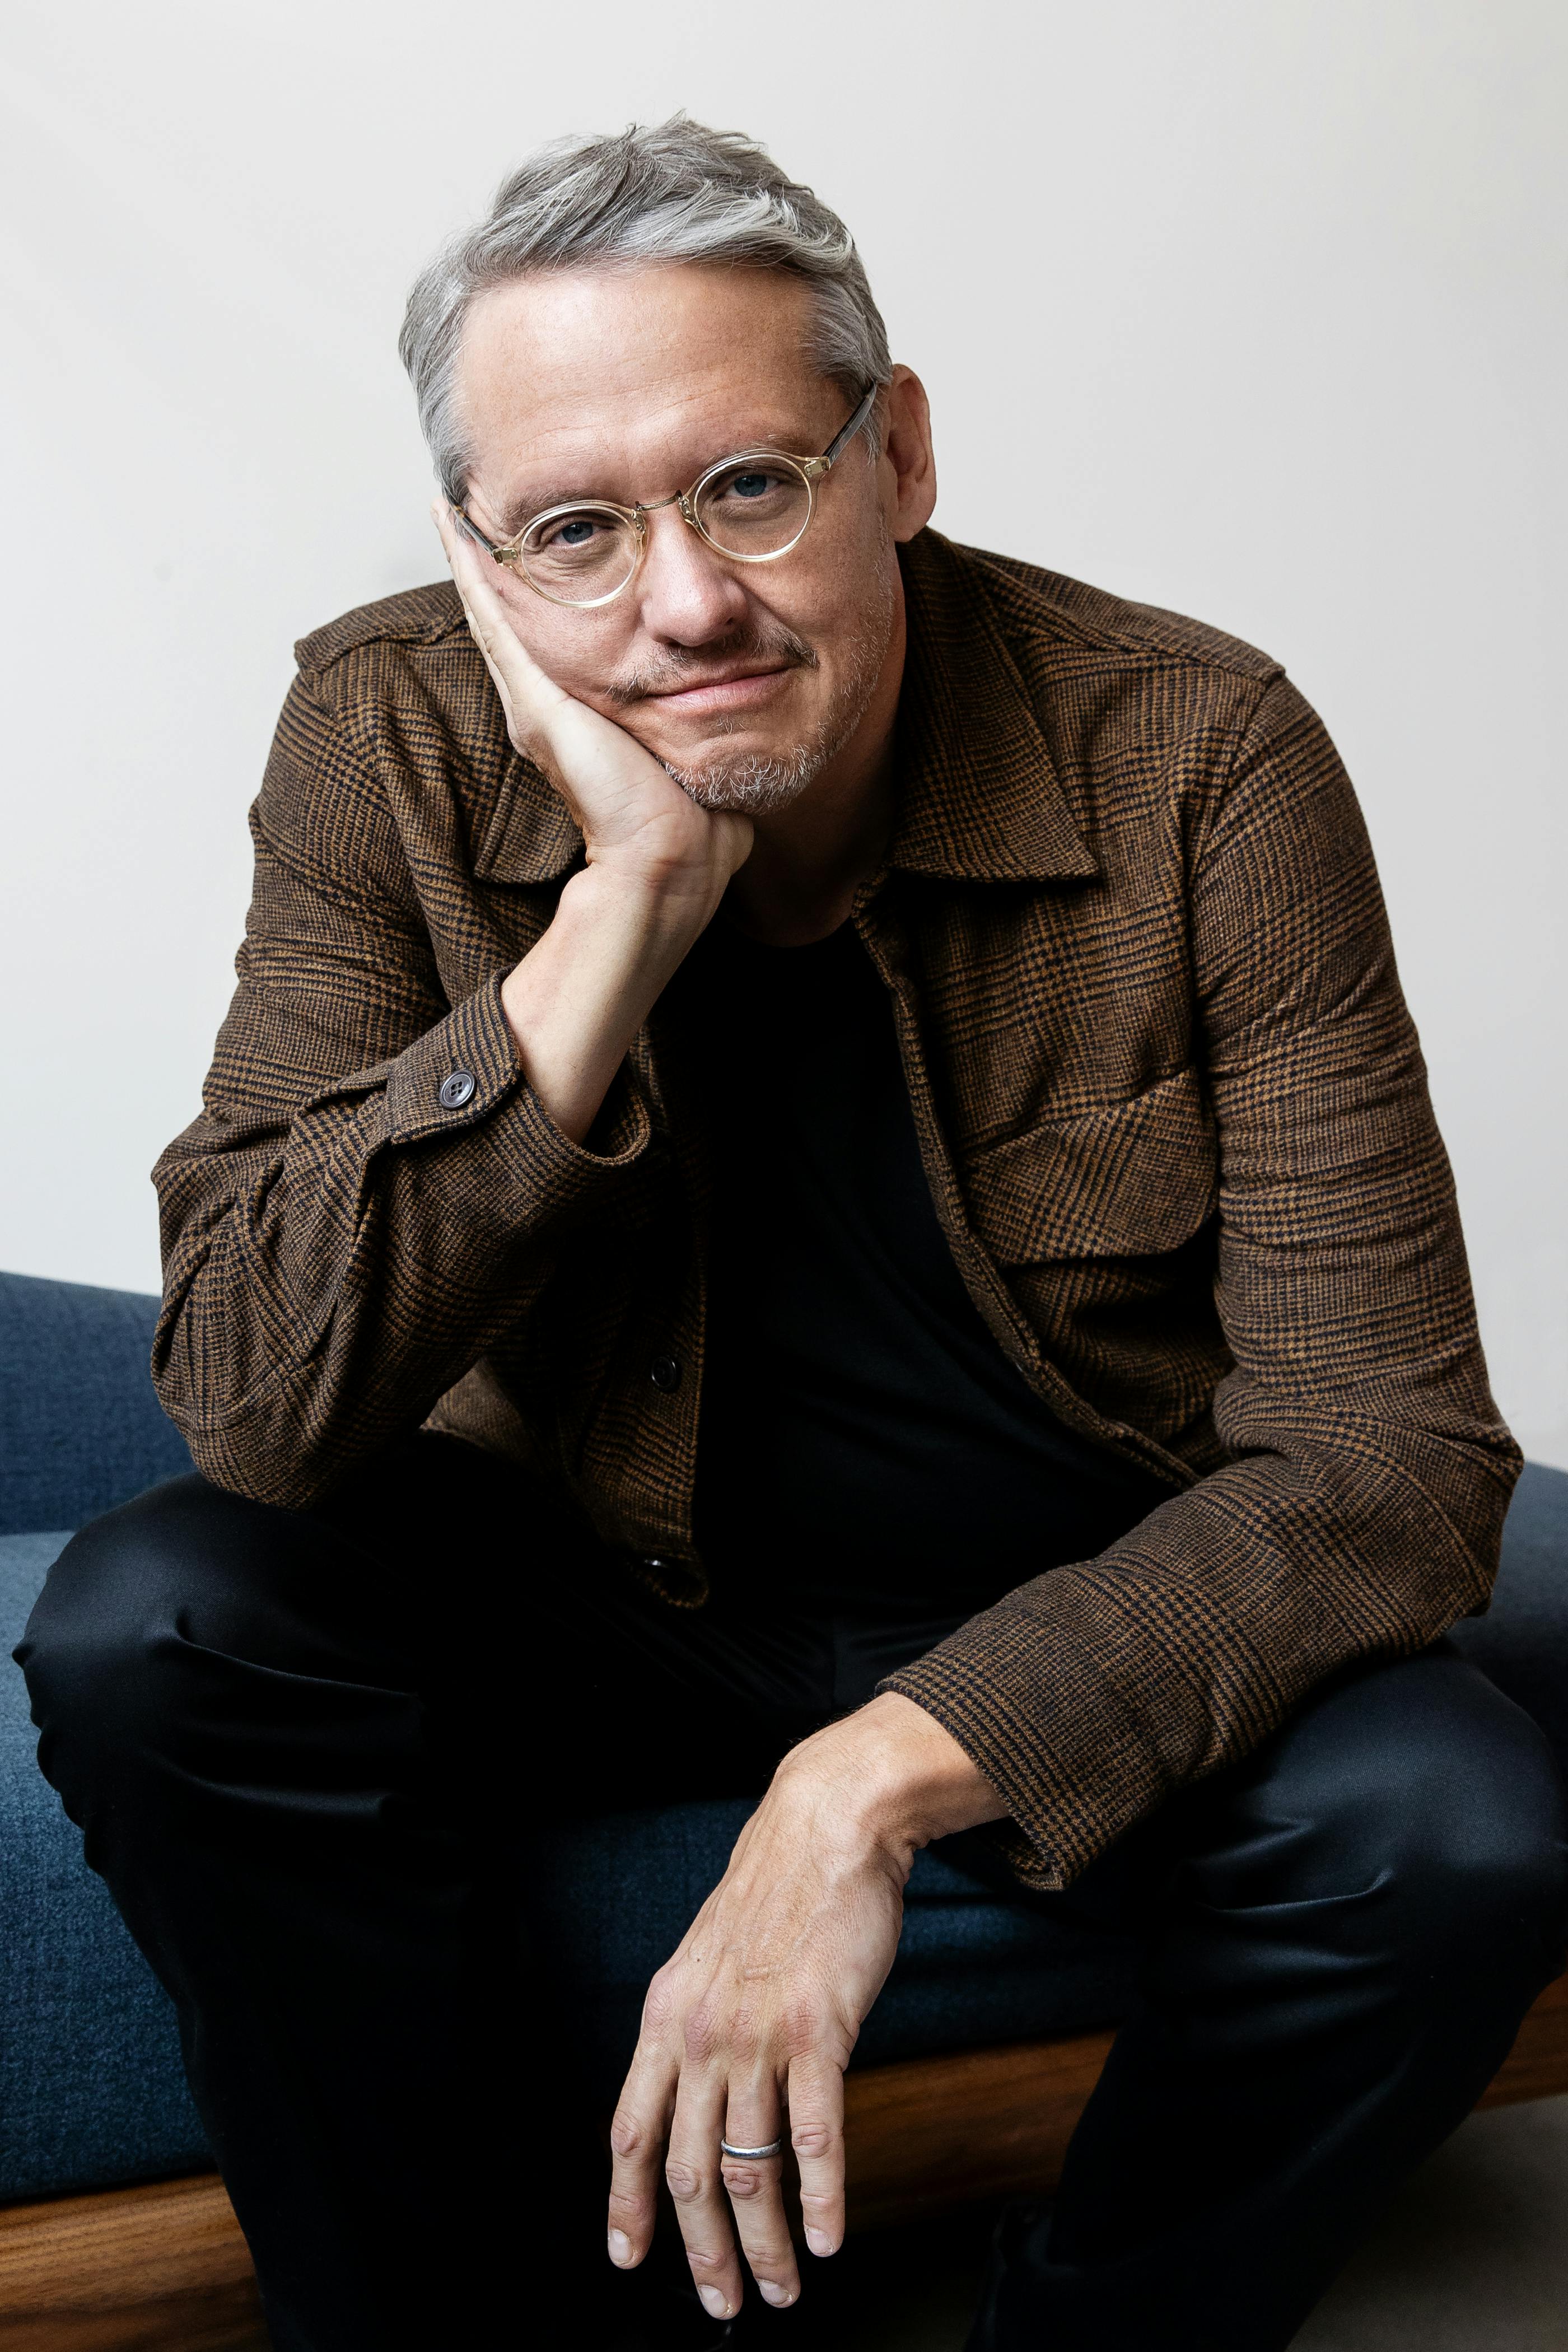 Adam McKay wears jeans and a brown jacket with his chin resting on his palm.